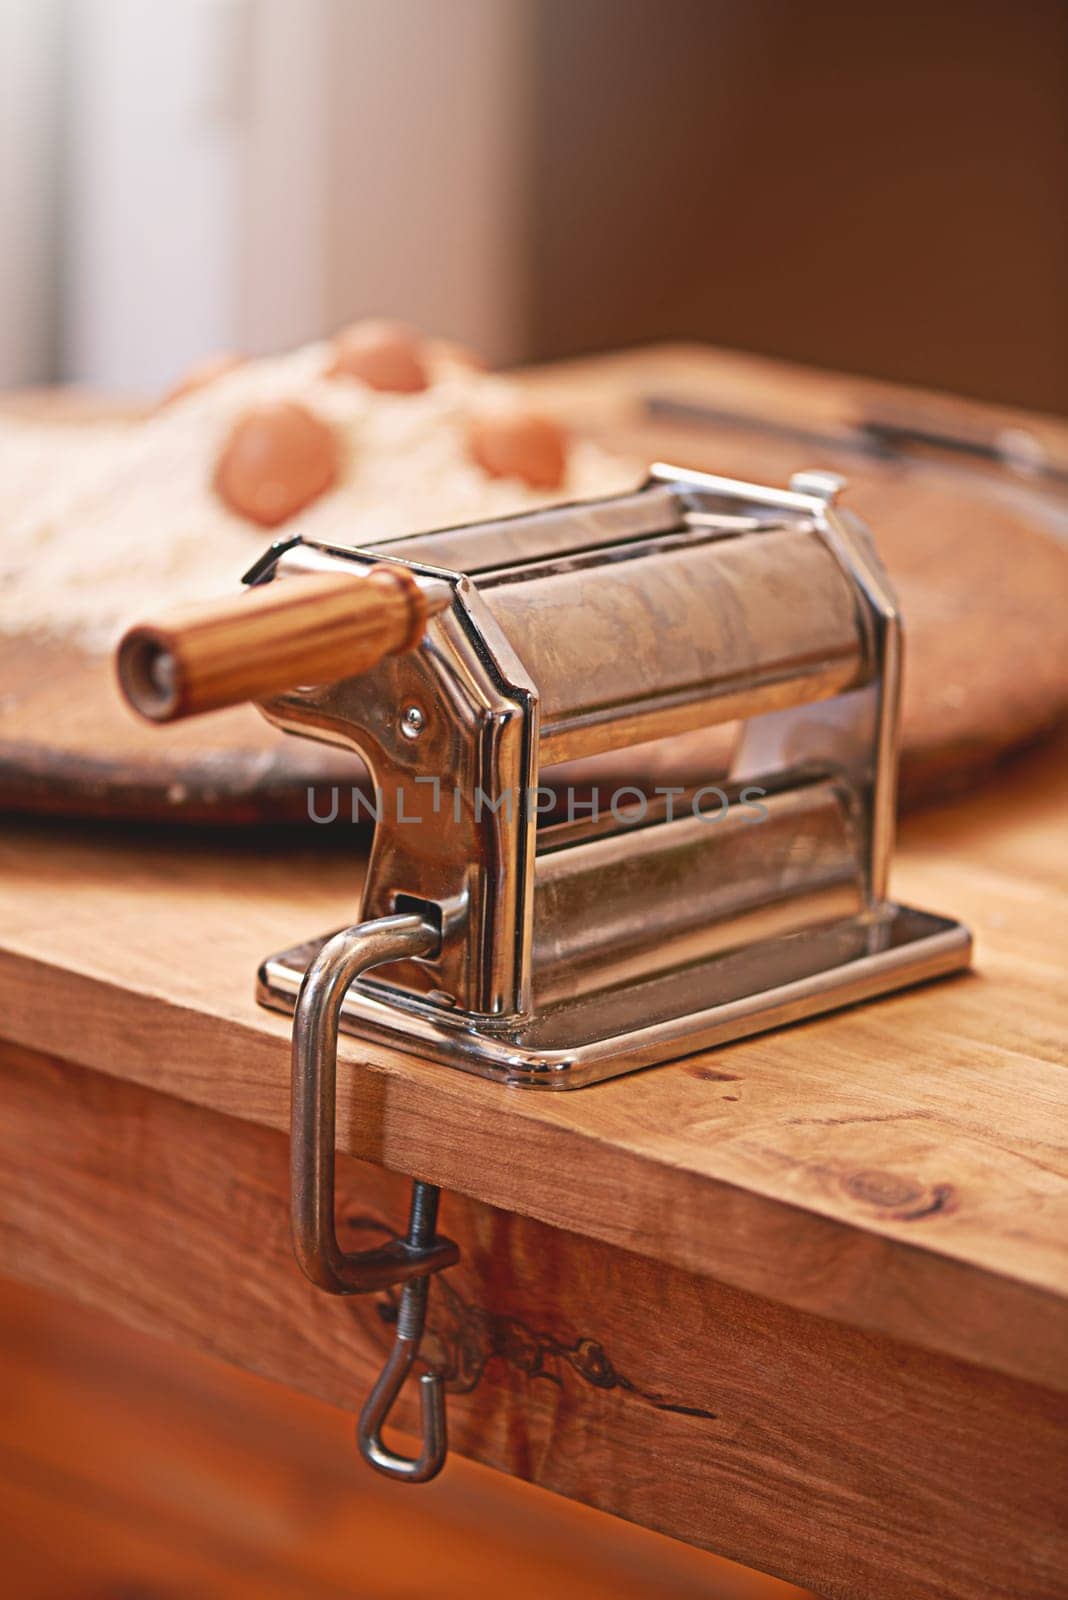 Cooking, dough and pasta maker in kitchen on table, counter and wooden board for cuisine. Food, baking and culinary tool, machine or utensil for flour, ingredients and eggs for homemade noodles by YuriArcurs